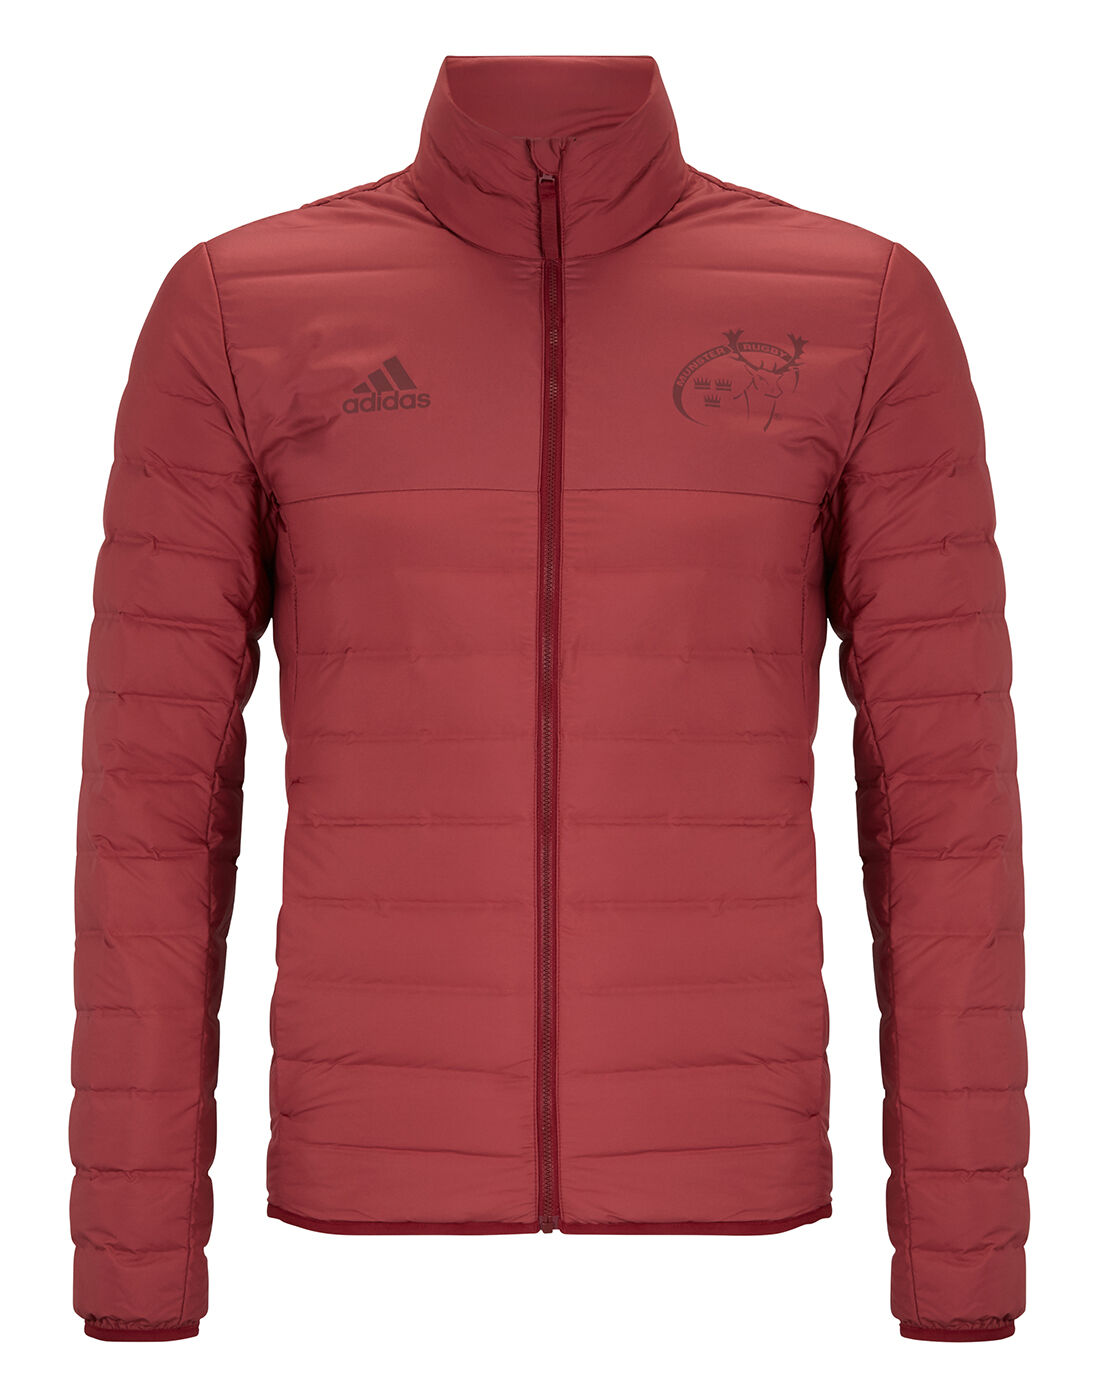 munster rugby jackets